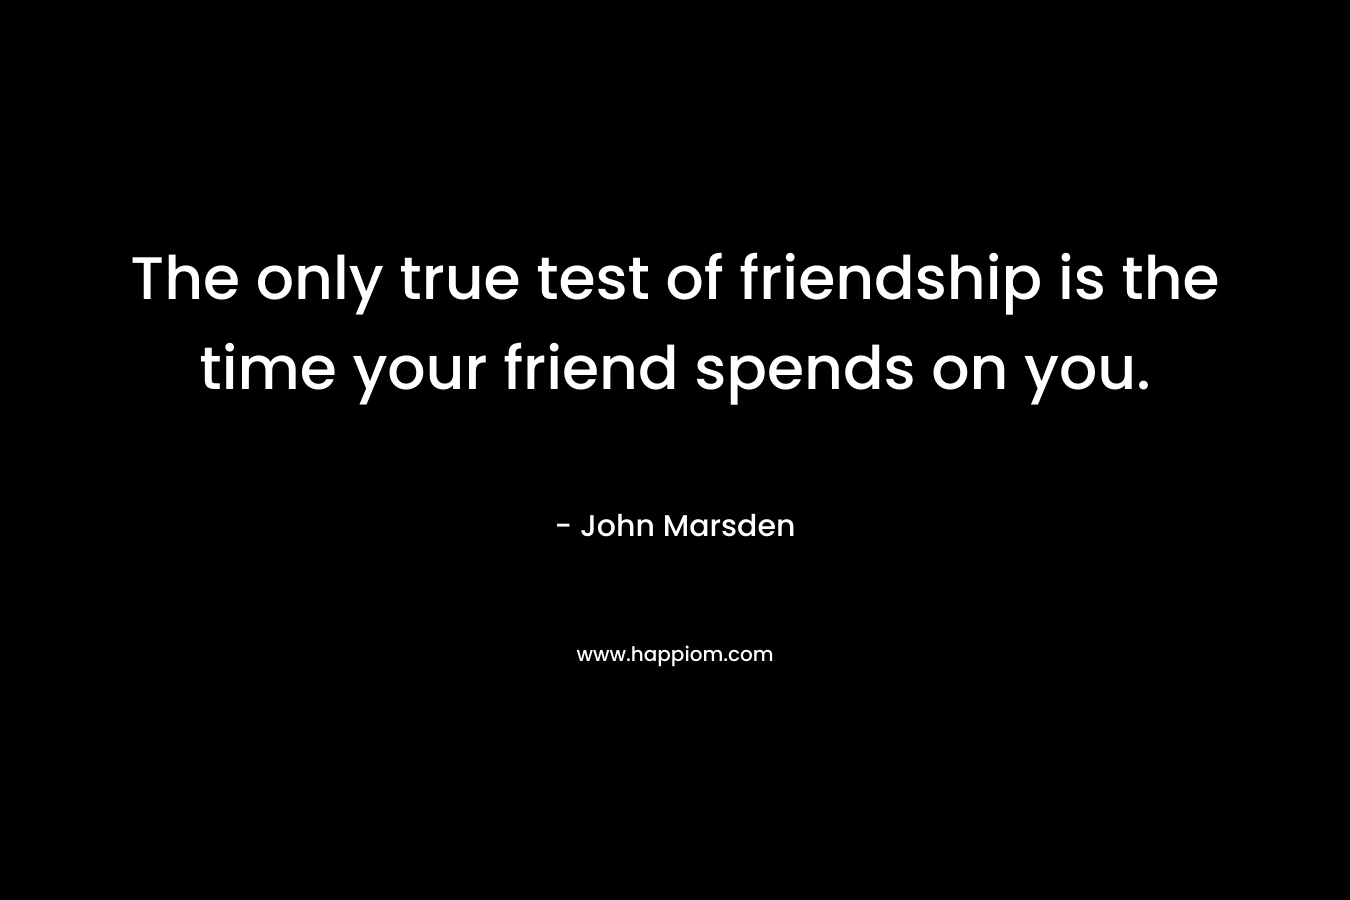 The only true test of friendship is the time your friend spends on you. – John Marsden